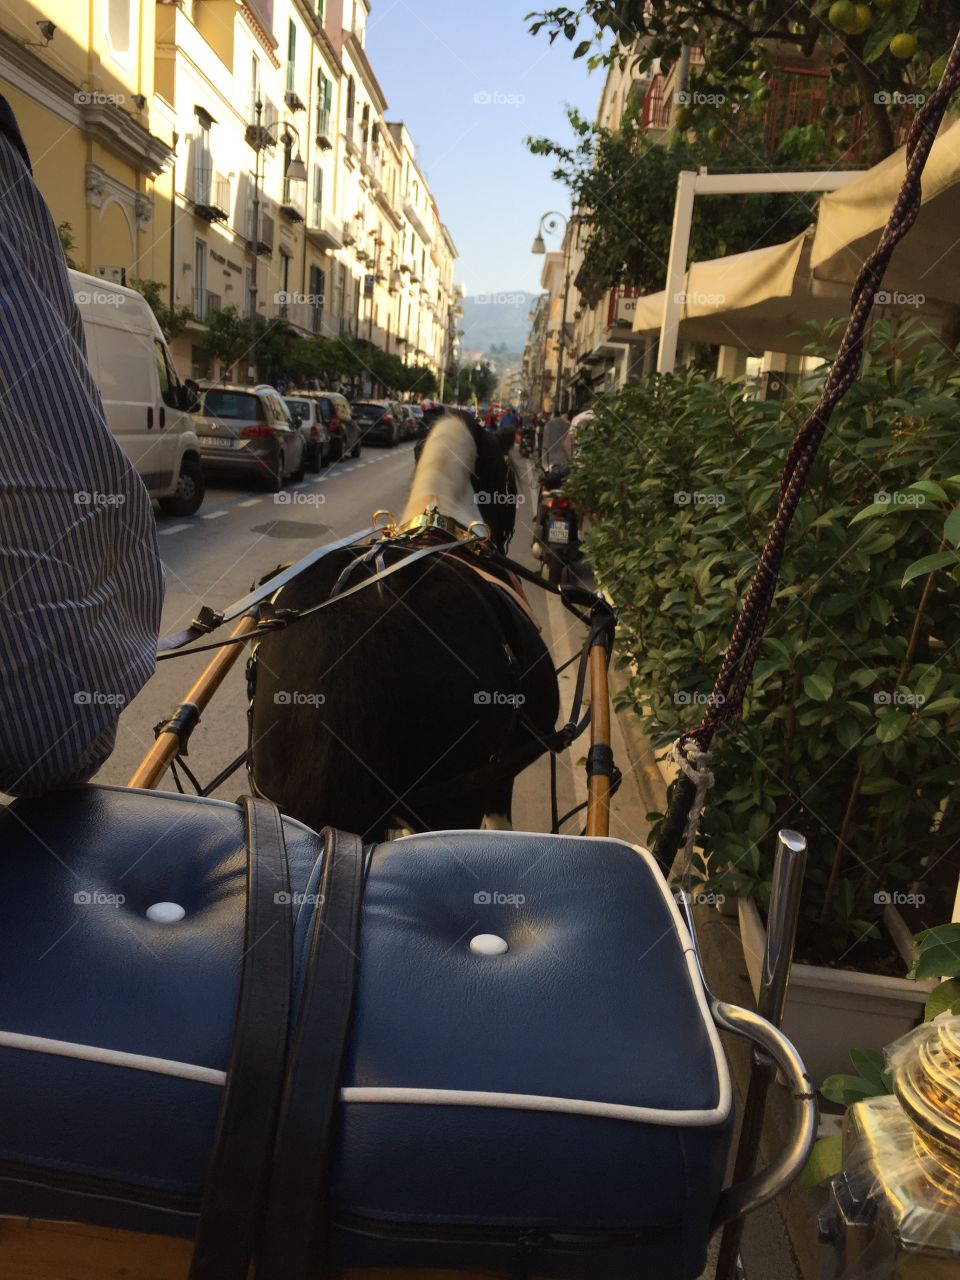 Carriage ride in Sorrento 